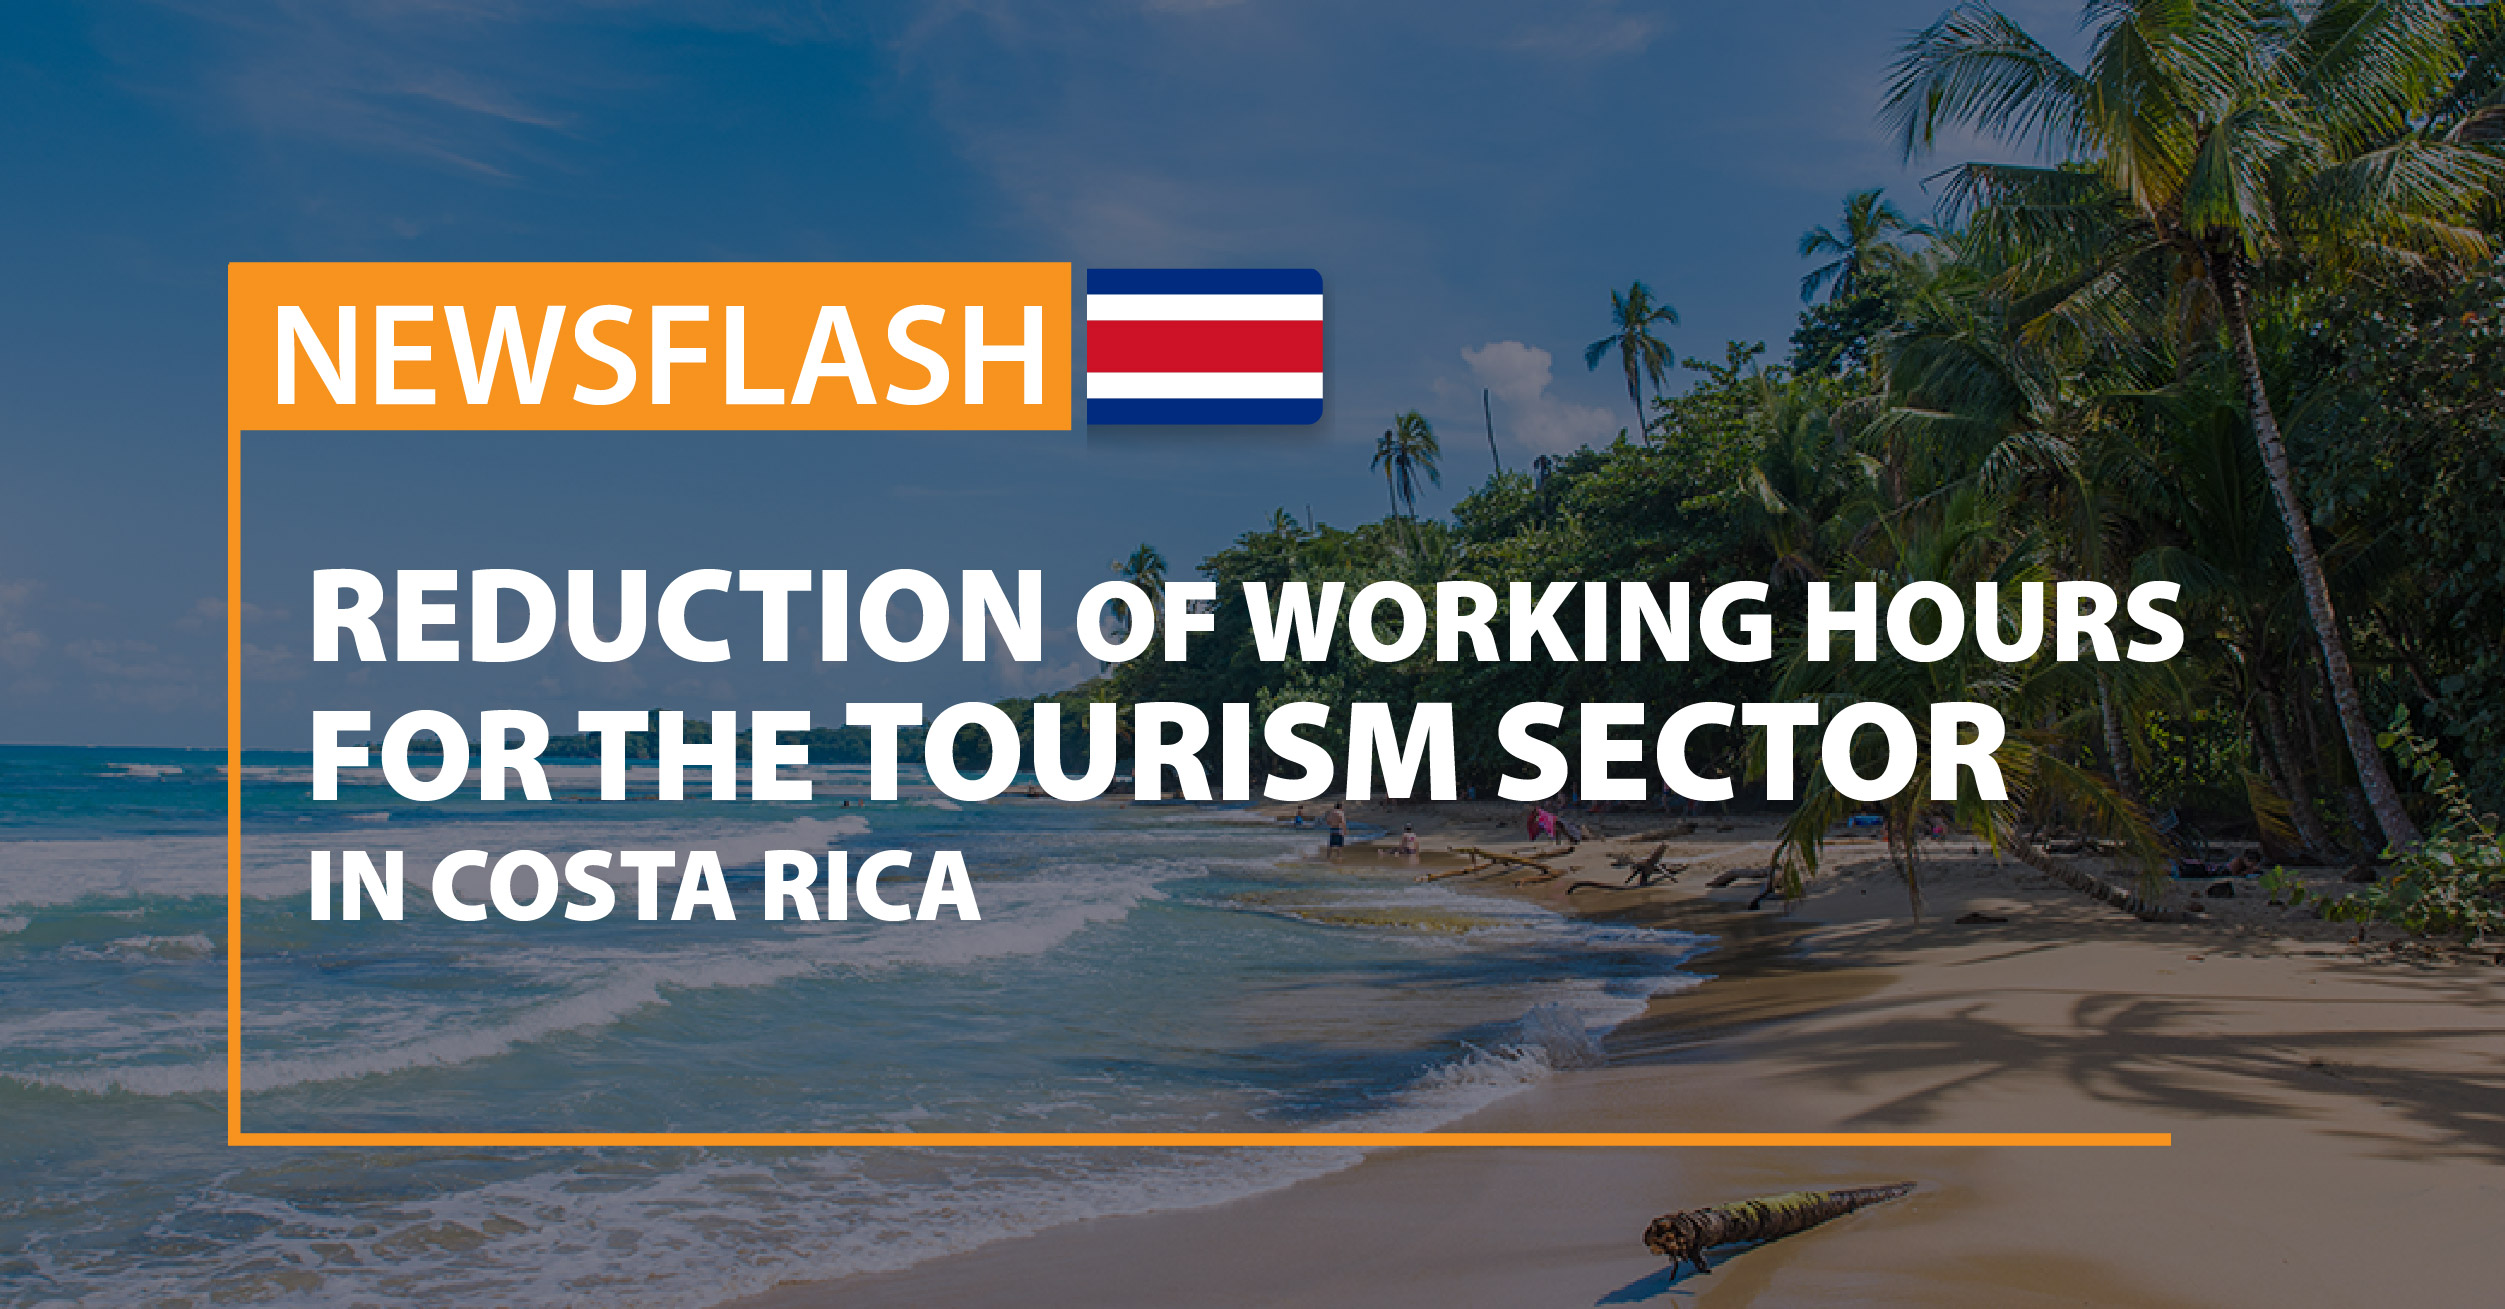 Extension of the reduction of working hours for the tourism sector of Costa Rica